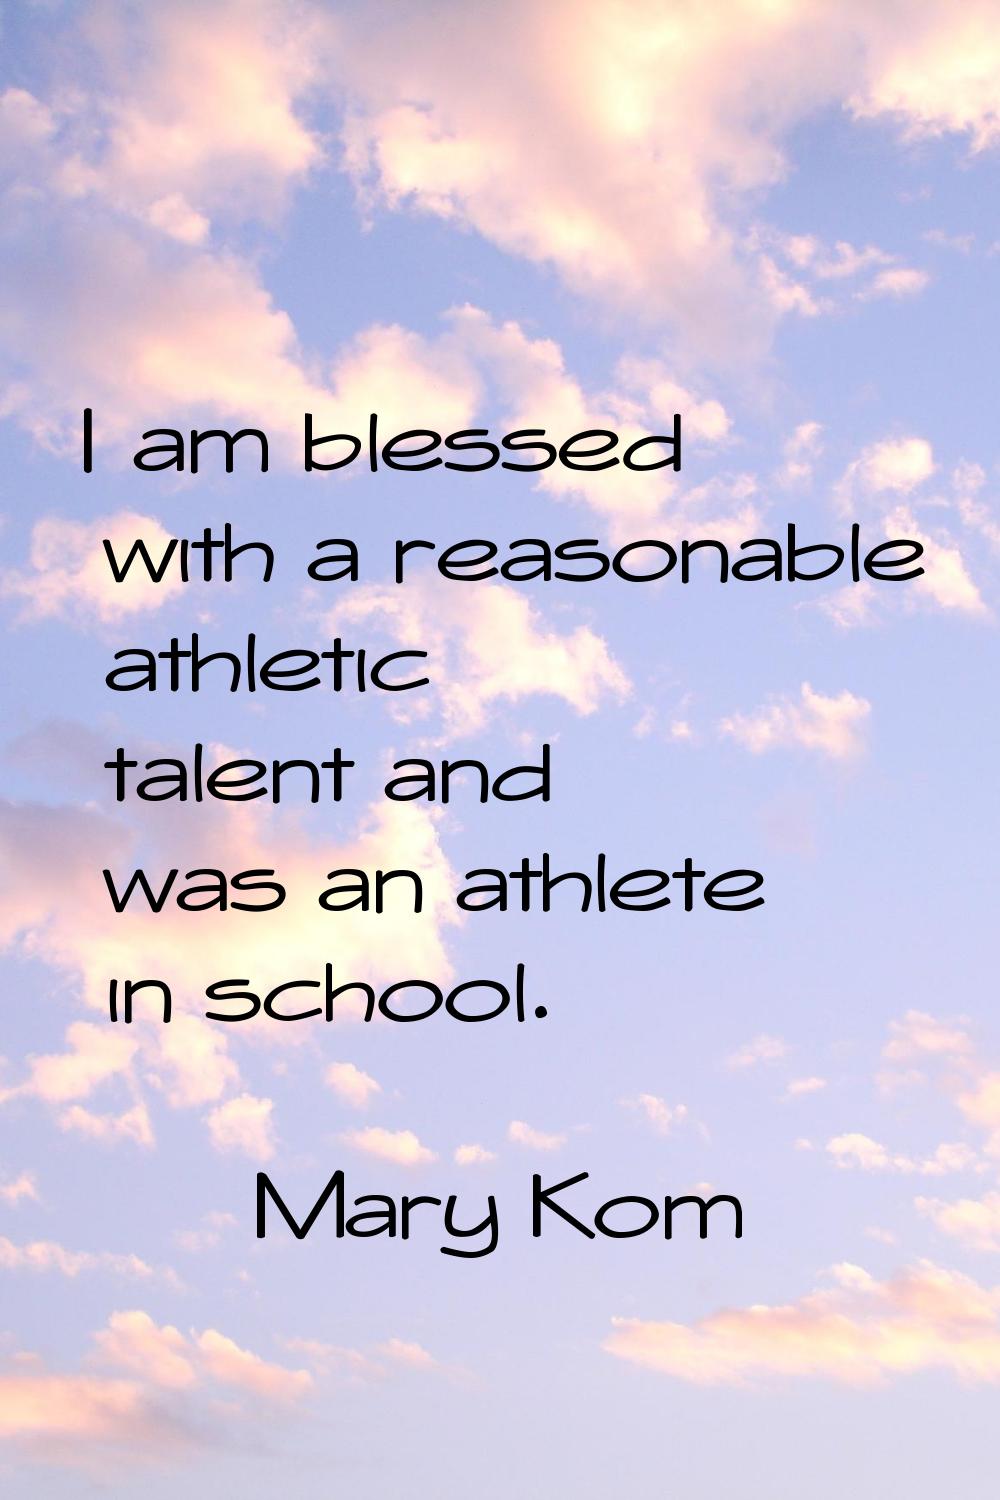 I am blessed with a reasonable athletic talent and was an athlete in school.